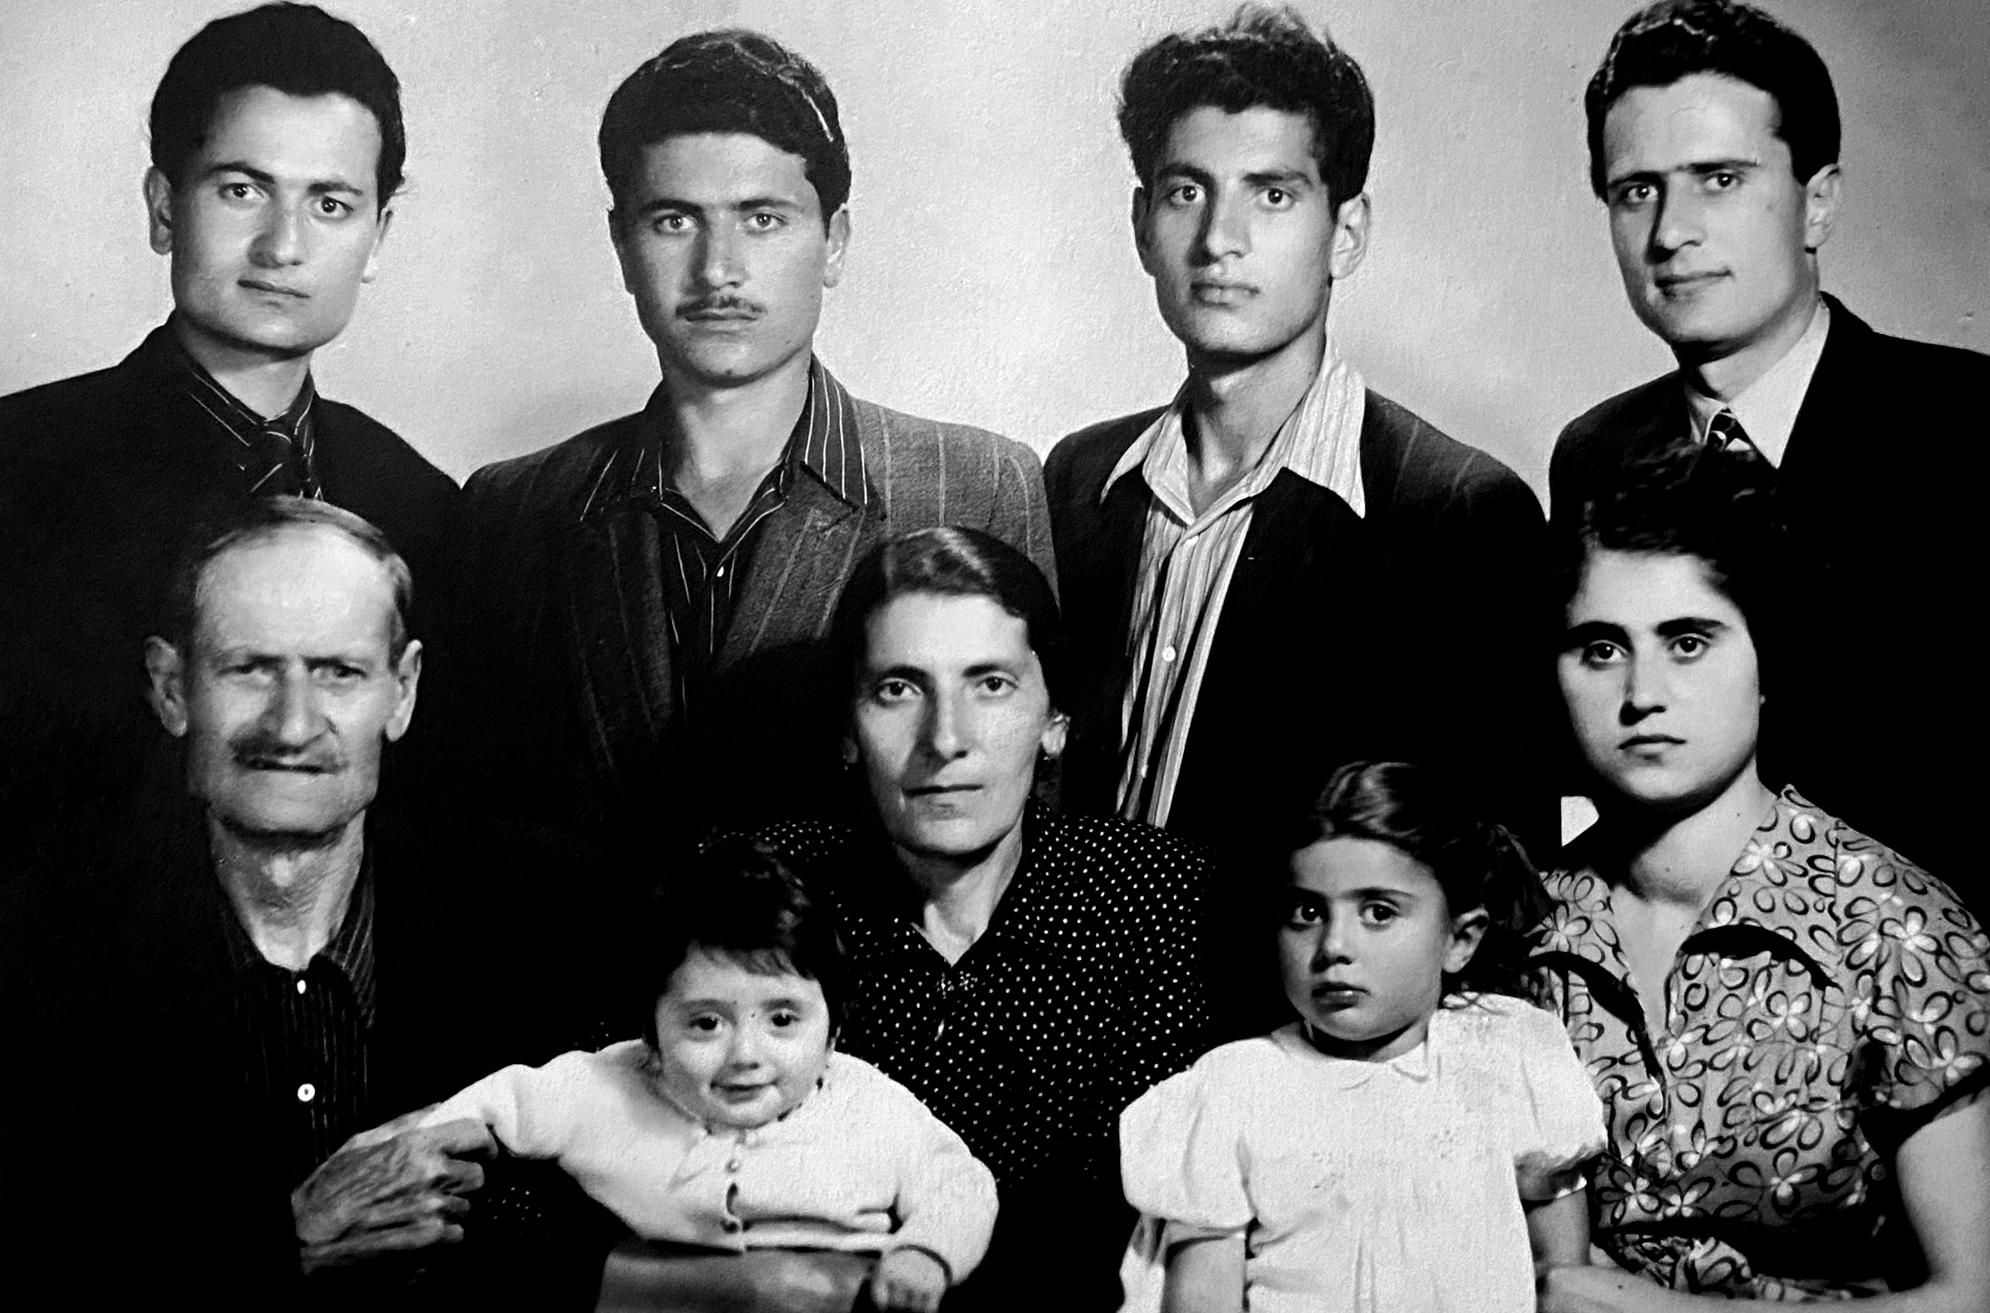 Simon Maghakyan’s paternal family in 1955, all gone now. On the left, holding Maghakyan’s baby father, are his great-grandparents who had survived the Armenian Genocide in Urfa (modern Turkey). (Courtesy Simon Maghakyan)